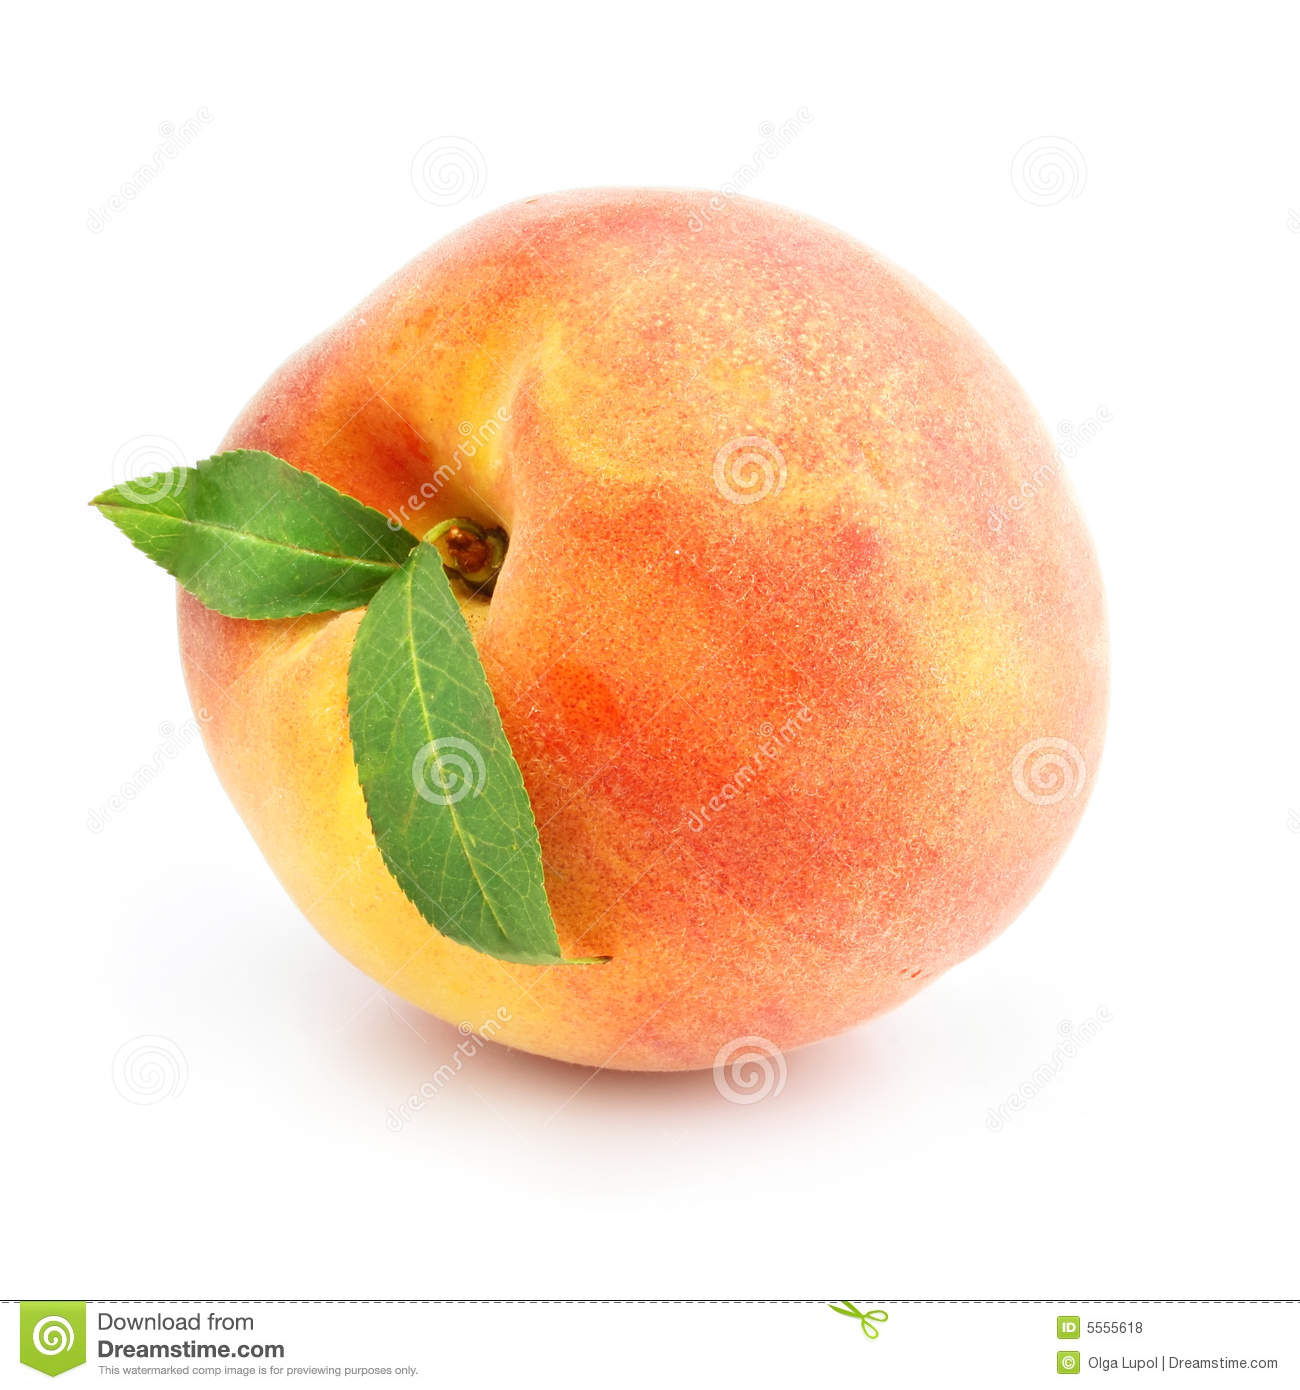 Ripe Peach Fruit With Green Leafs Isolated Royalty Free Stock Photos